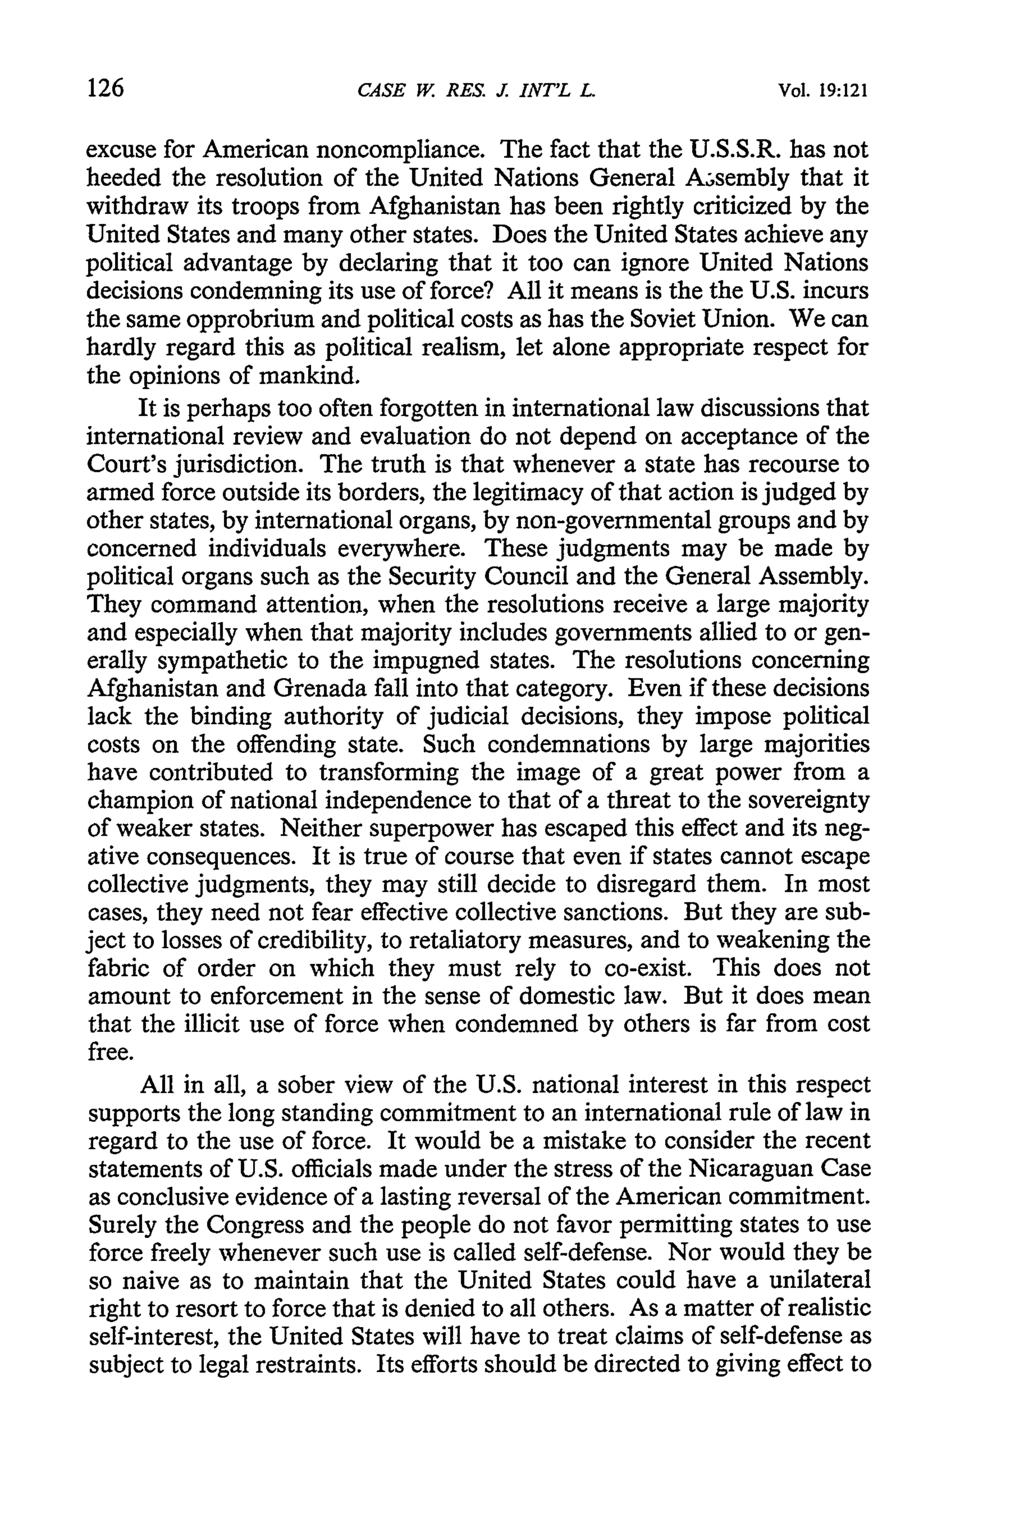 CASE W. RES. J. INT'L L. Vol. 19:121 excuse for American noncompliance. The fact that the U.S.S.R. has not heeded the resolution of the United Nations General A.